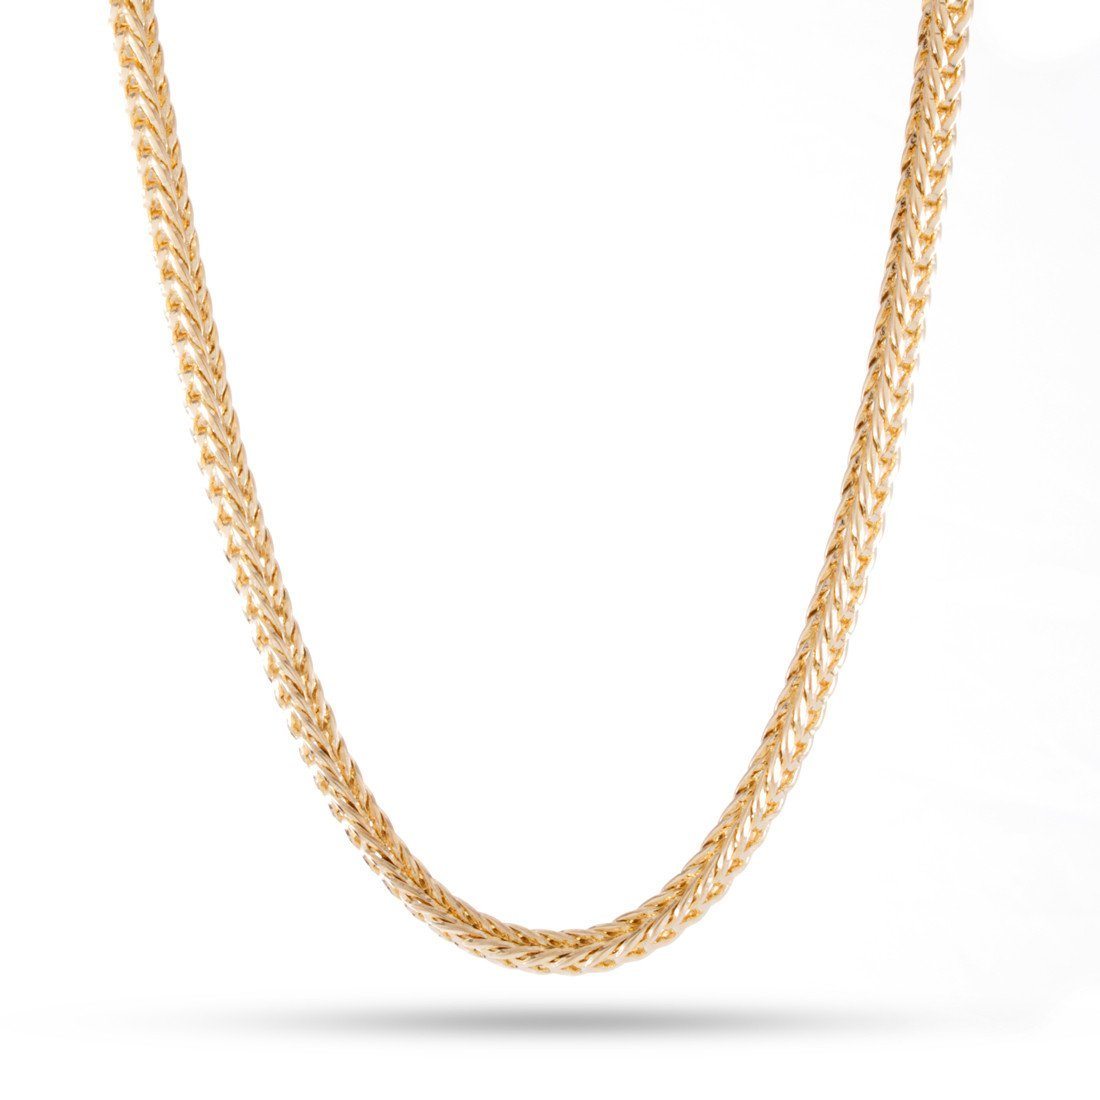 4mm Men's 14K Yellow Gold Plated Franco Chain